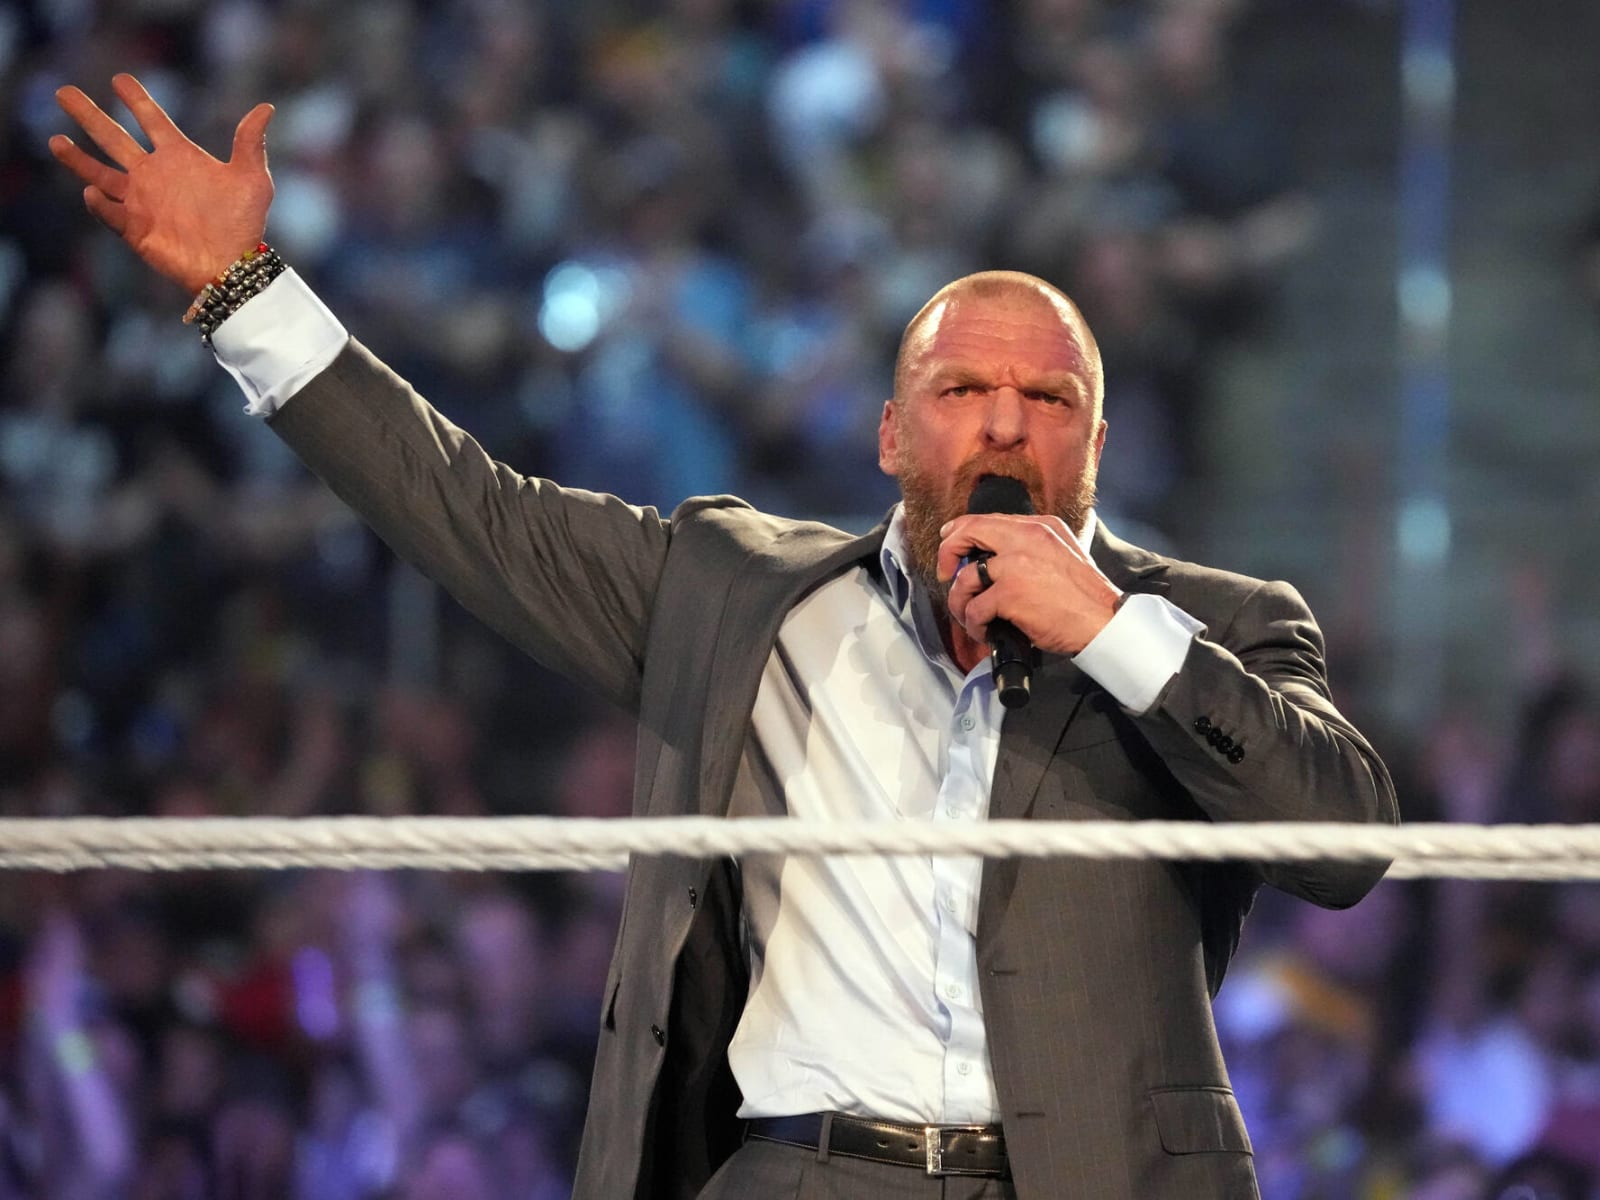 Triple H Responds To The Rock On WWE SmackDown